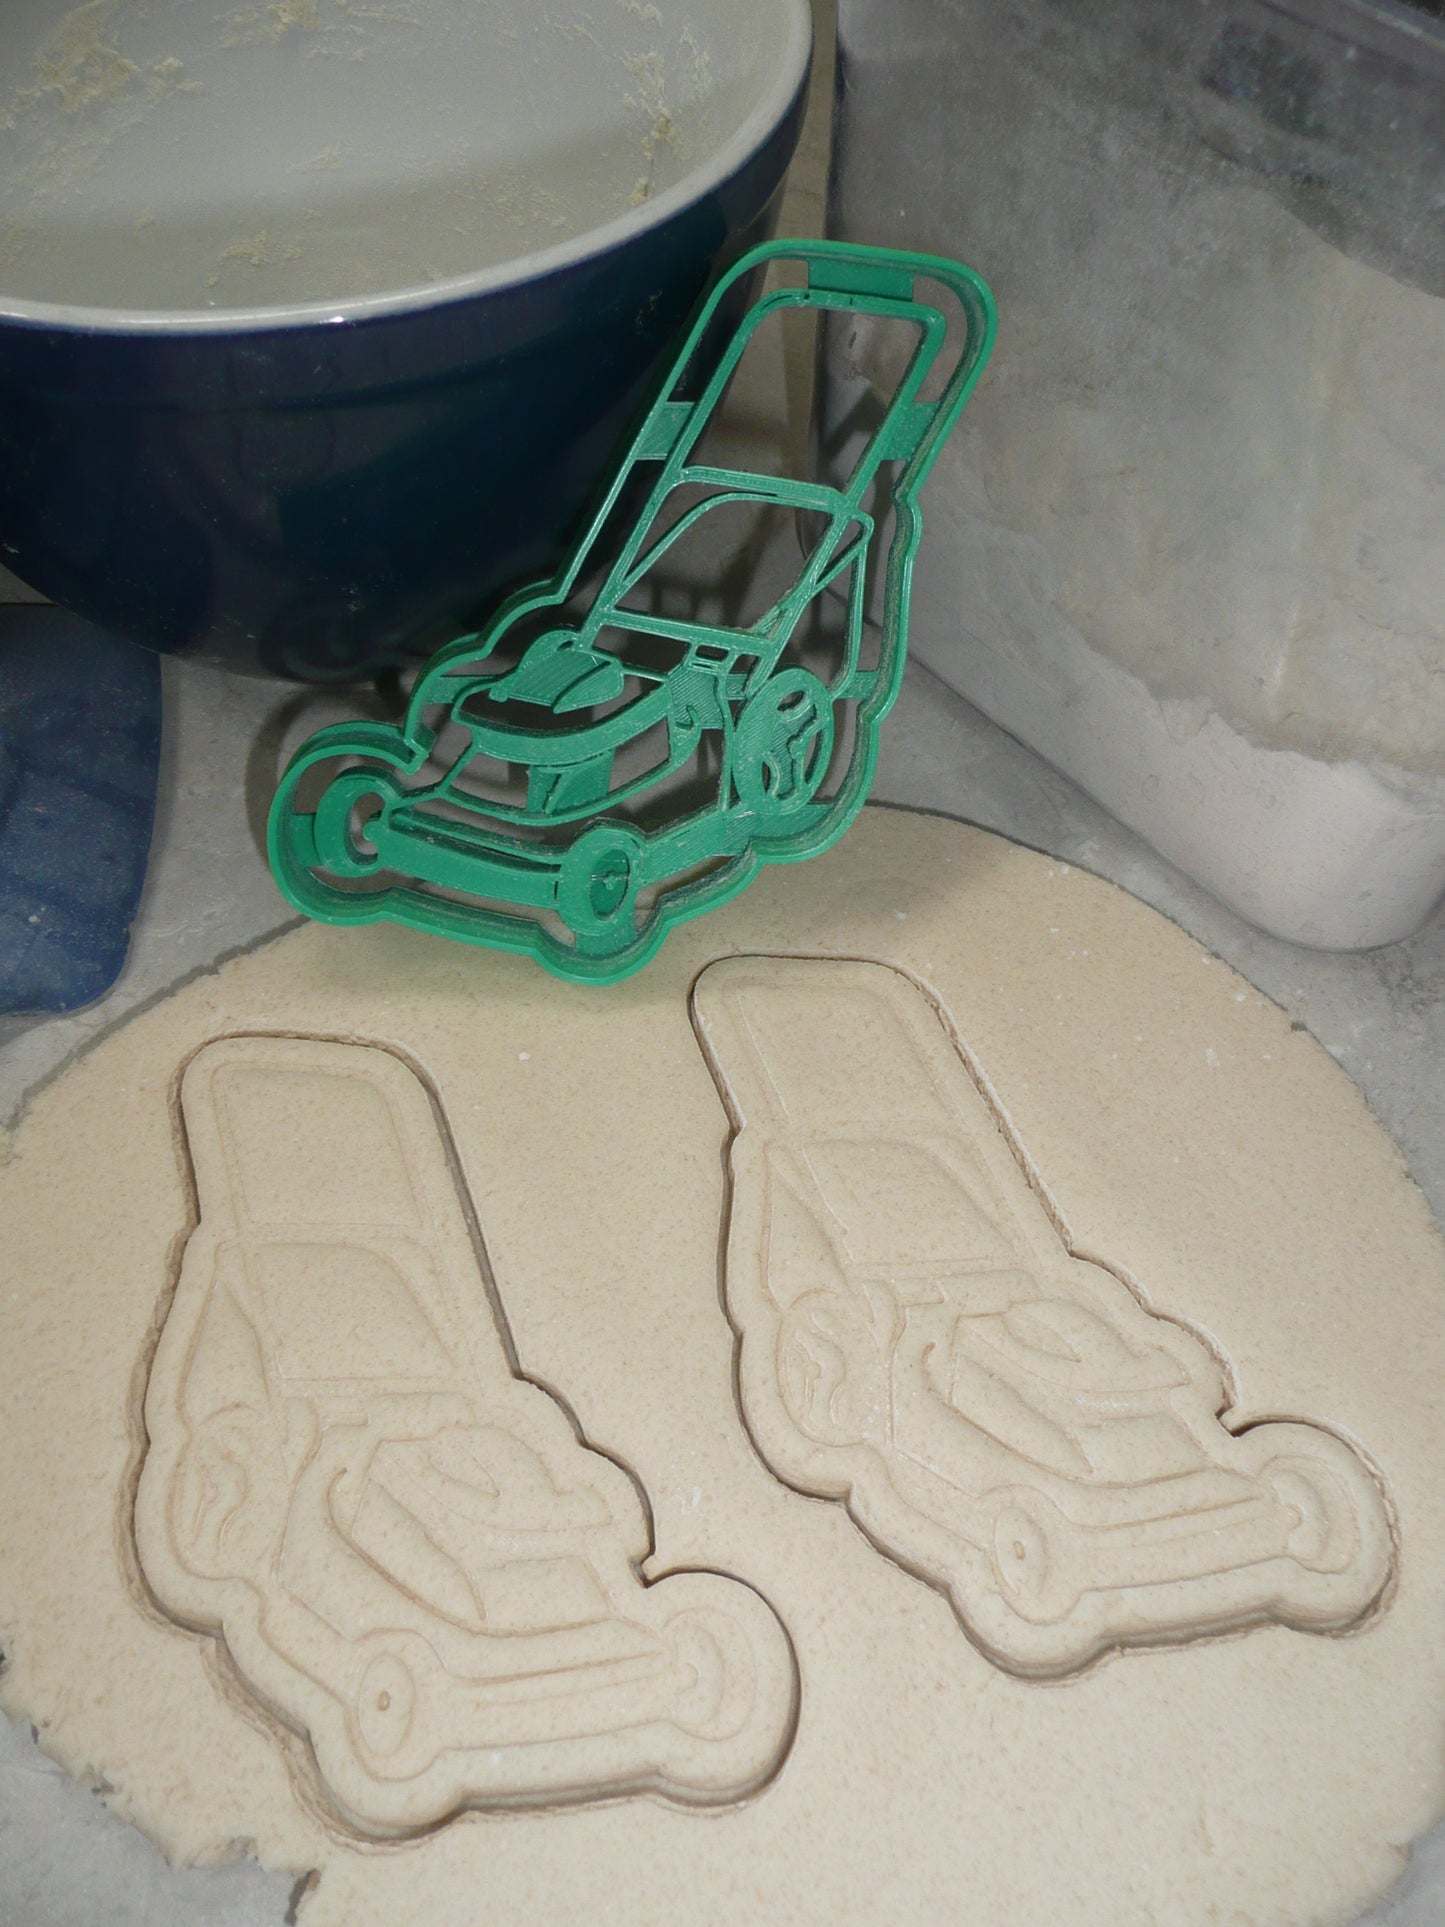 Push Mower Lawn Yard Care Equipment Cookie Cutter Made In USA PR4671